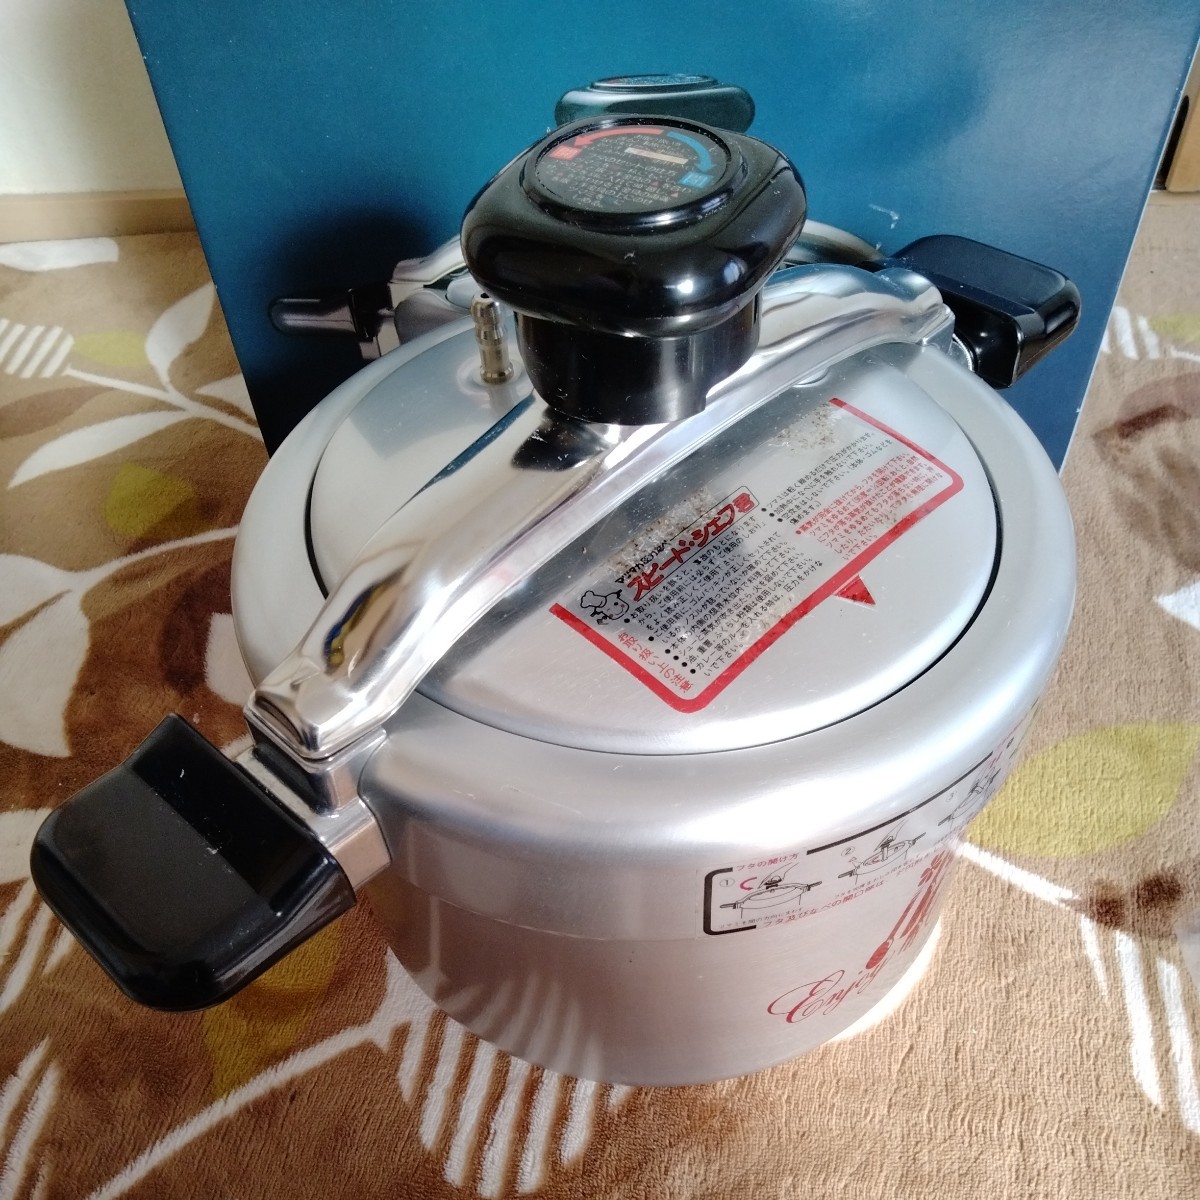 matsuoka pressure cooker 6L another cover attaching aluminium made in Japan passing of years boxed unused storage goods nursing . absence /.. ground ... contact later shipping is week 1 times. 